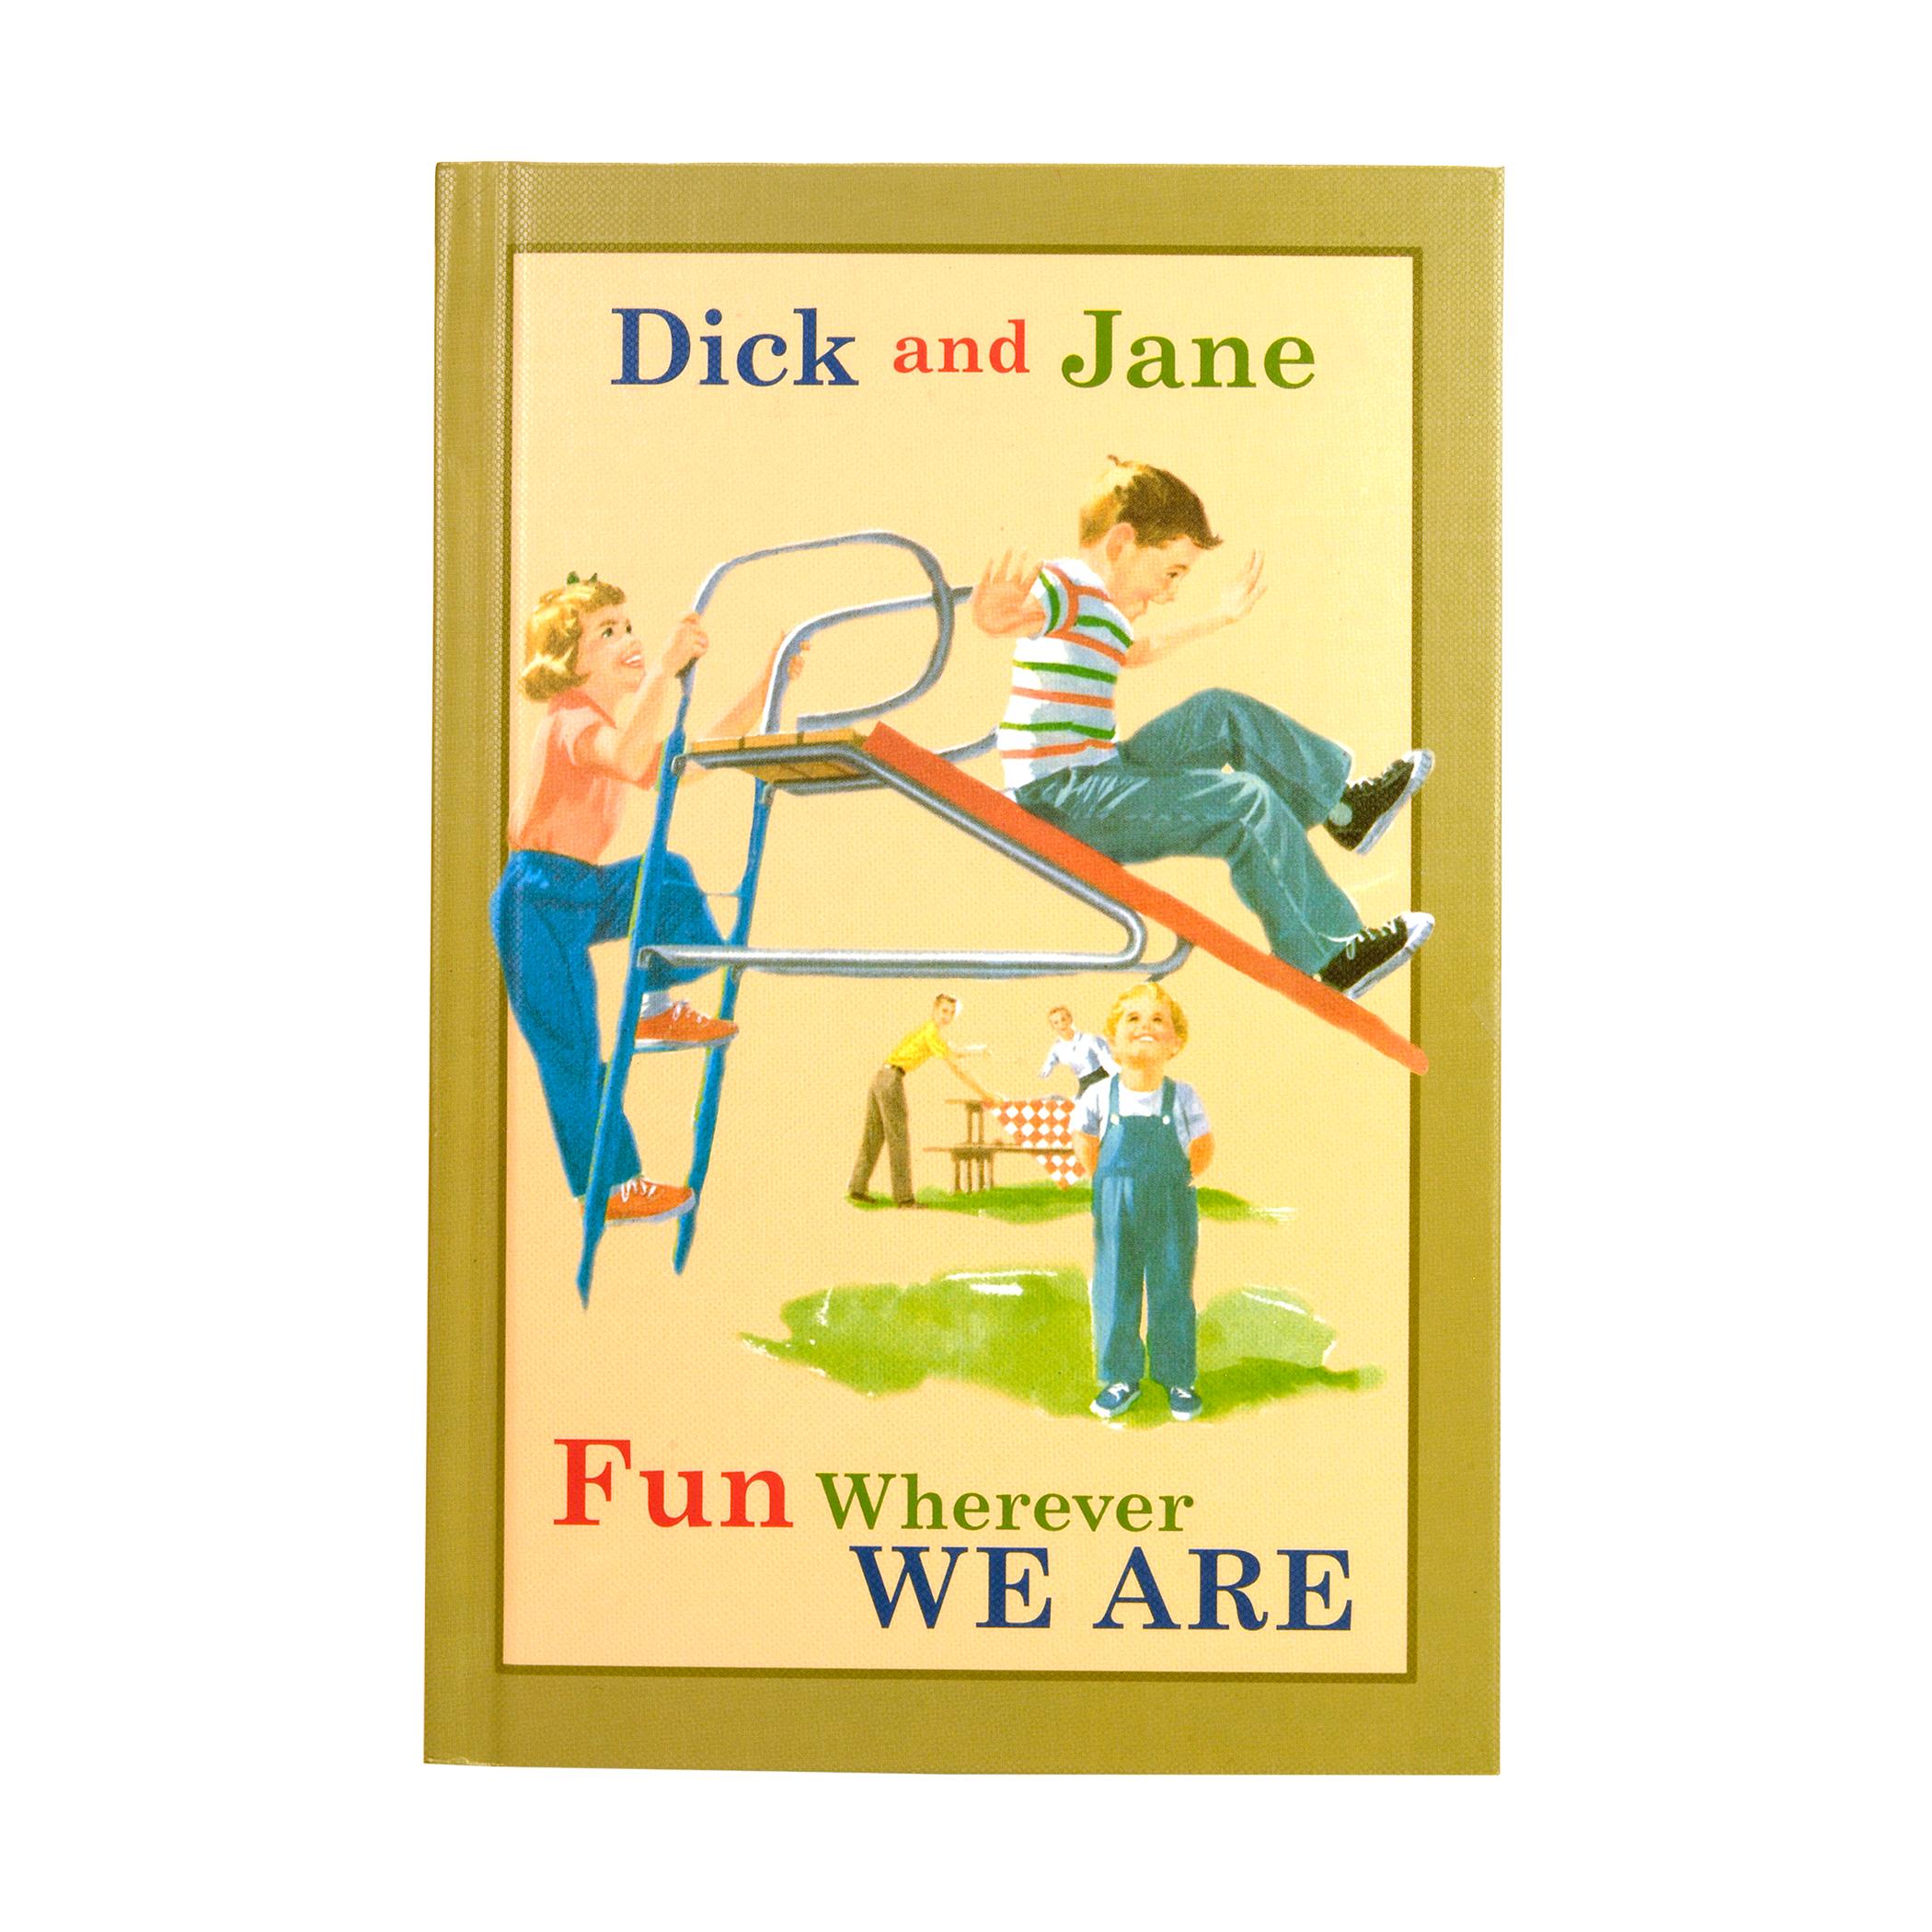  Dick And Jane Story Book - Fun Wherever We Are